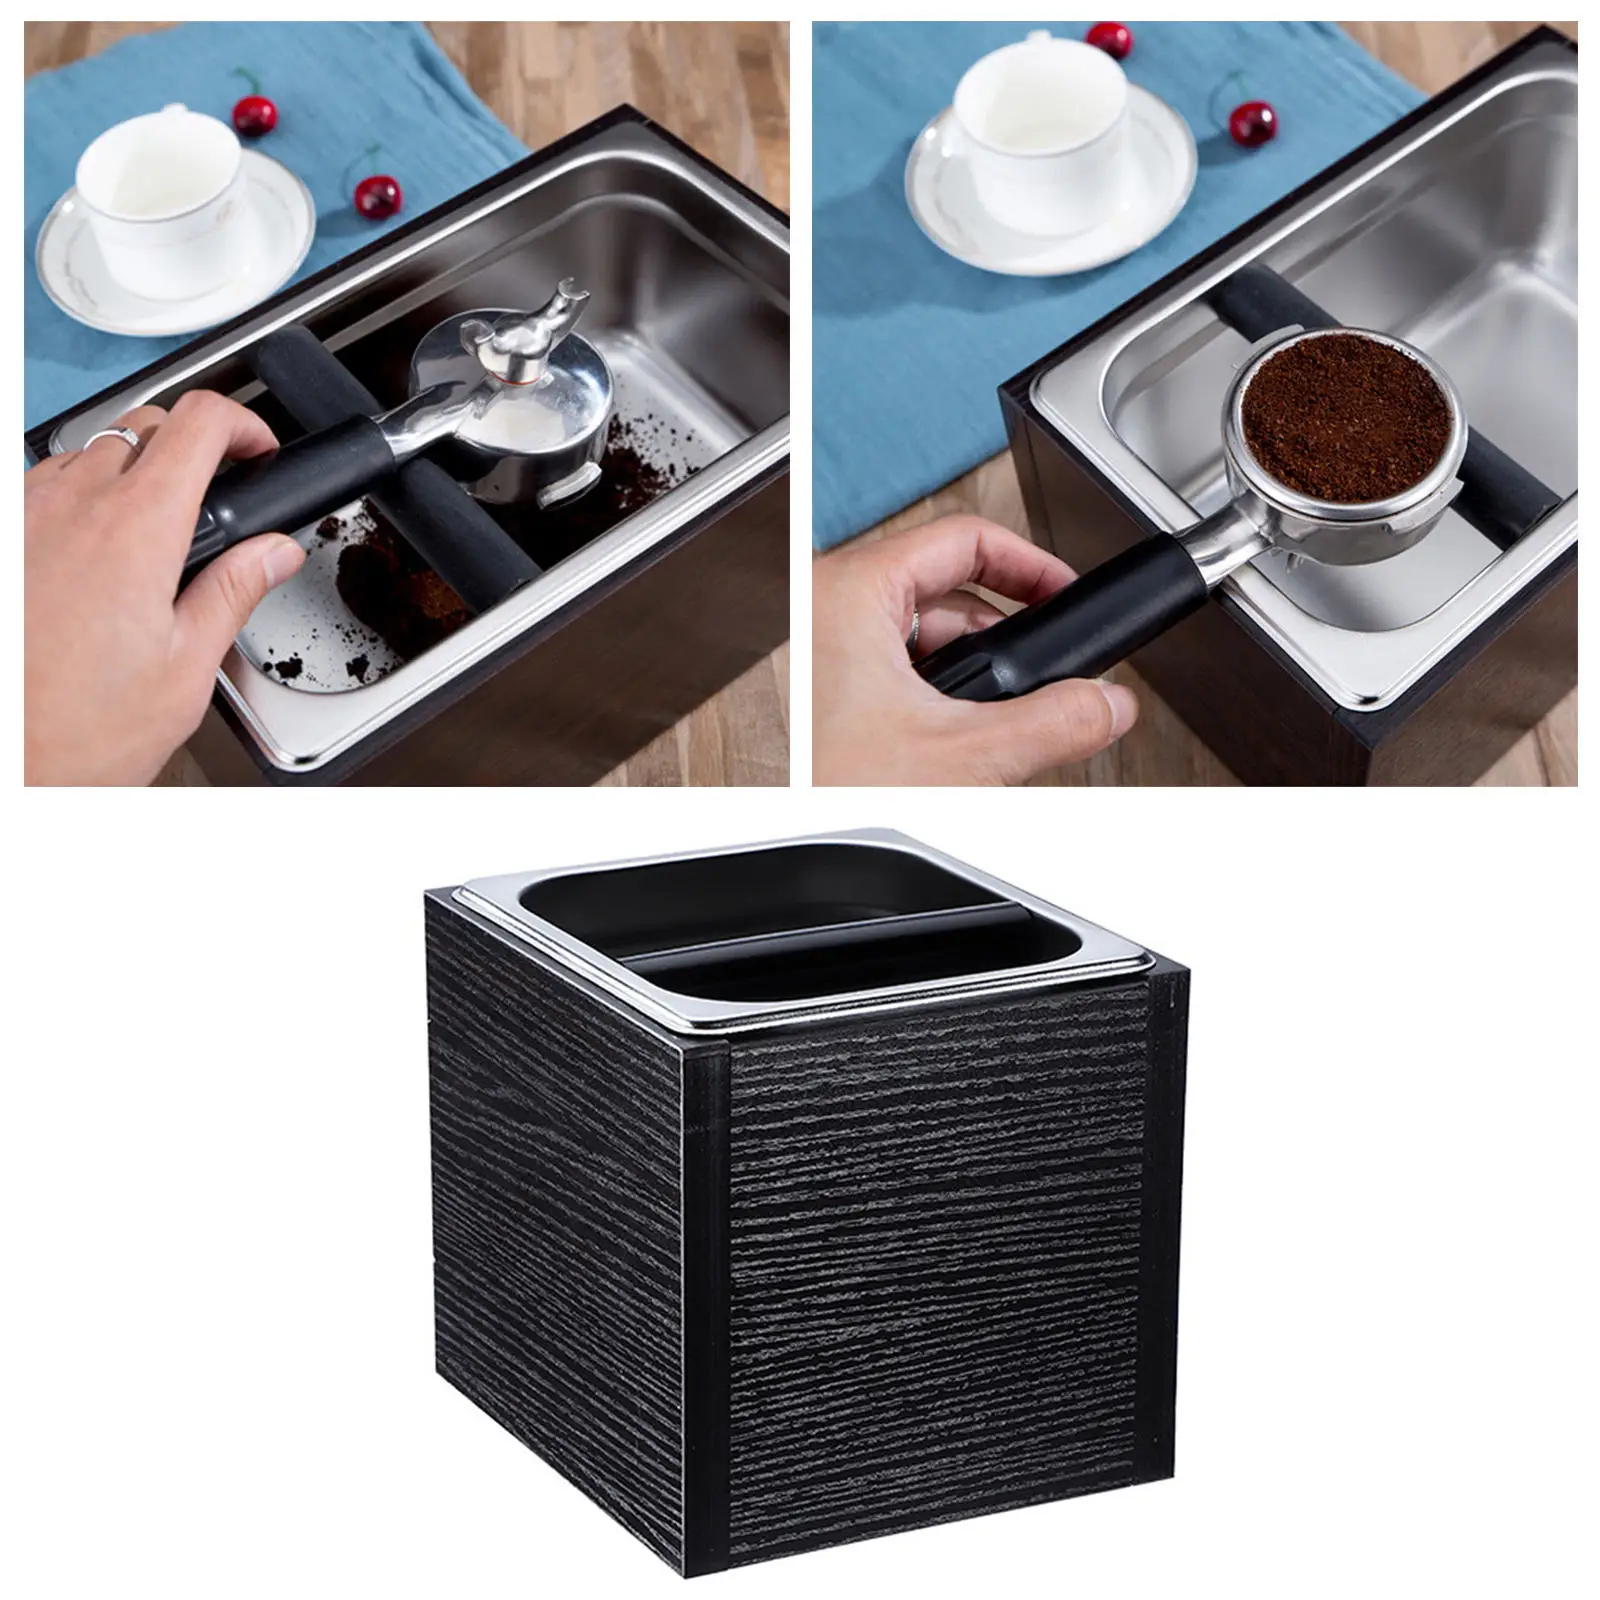 Coffee Knock Box Durable with Wooden Holder Wood Trash Can Milk Tea Shop